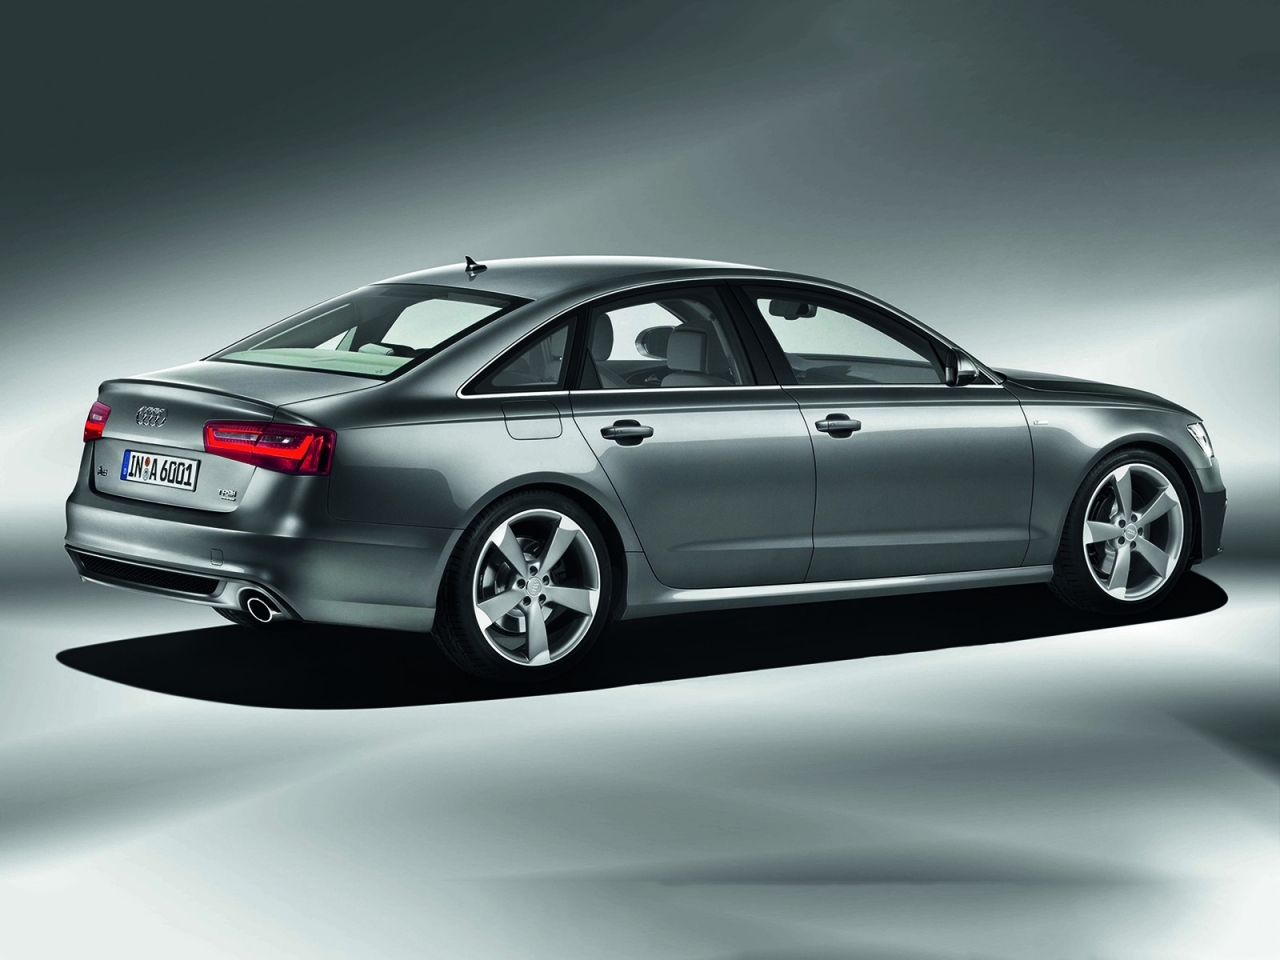 Audi A6 2012 for 1280 x 960 resolution